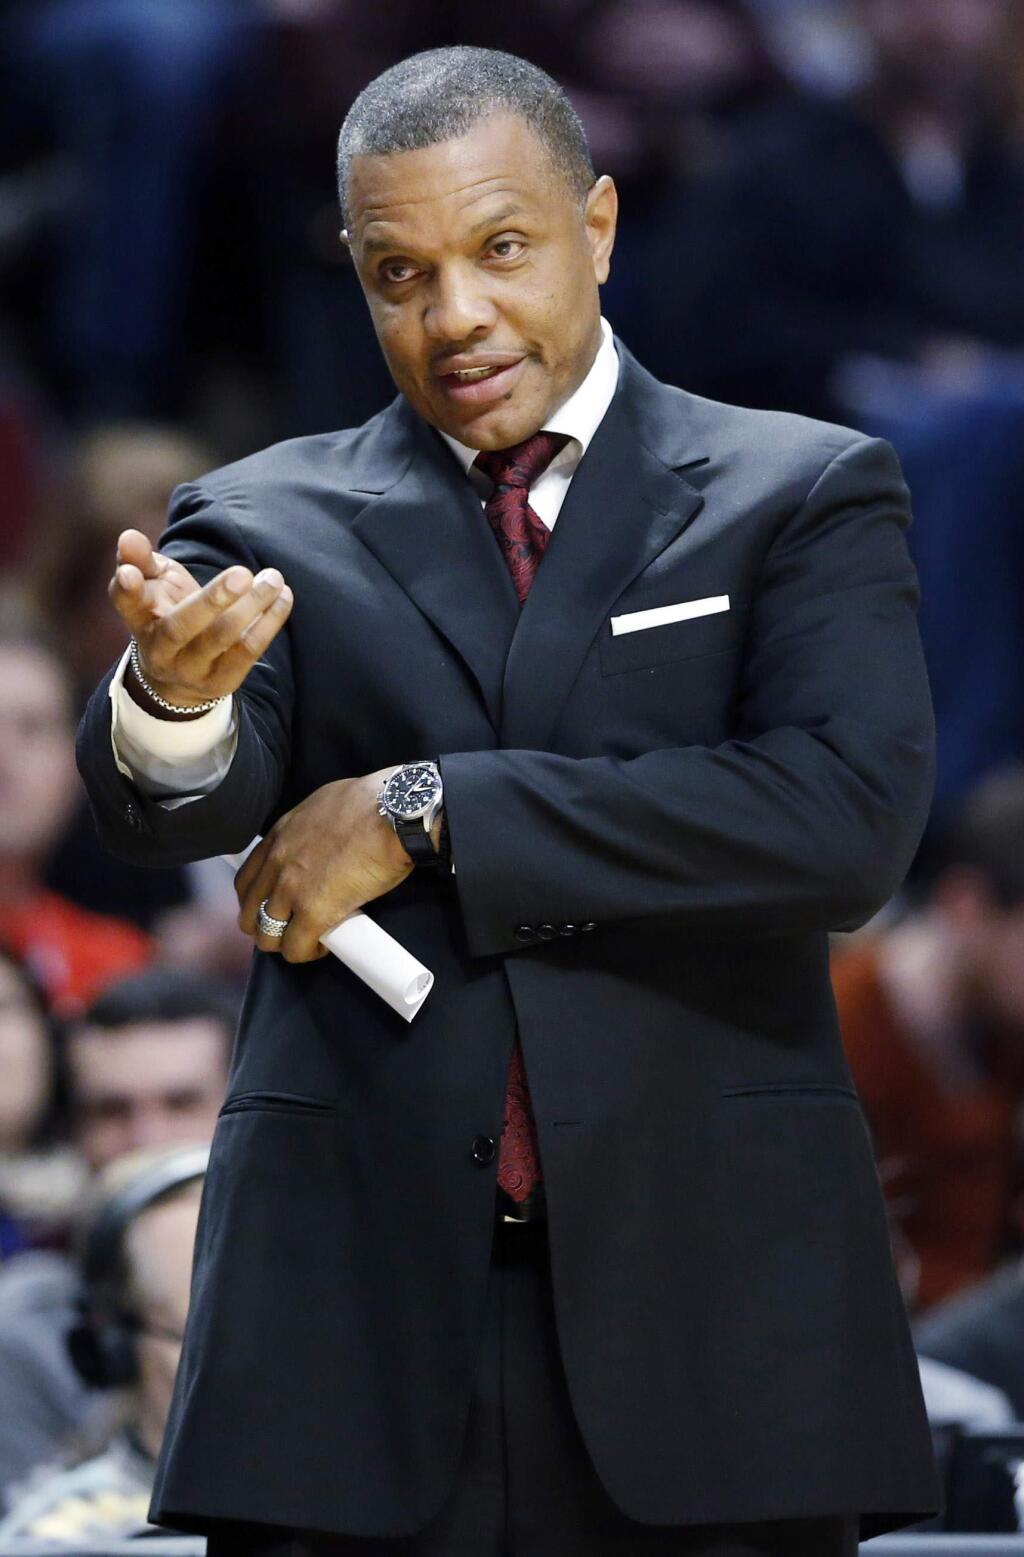 In this Saturday, Jan. 12, 2013 file photo, Phoenix Suns coach Alvin Gentry gestures during the first half of the Suns' NBA basketball game against the Chicago Bulls in Chicago. A person familiar with the situation says the New Orleans Pelicans have hired Golden State Warriors assistant Alvin Gentry as head coach, Saturday, May 30, 2015. (AP Photo/Nam Y. Huh, File)